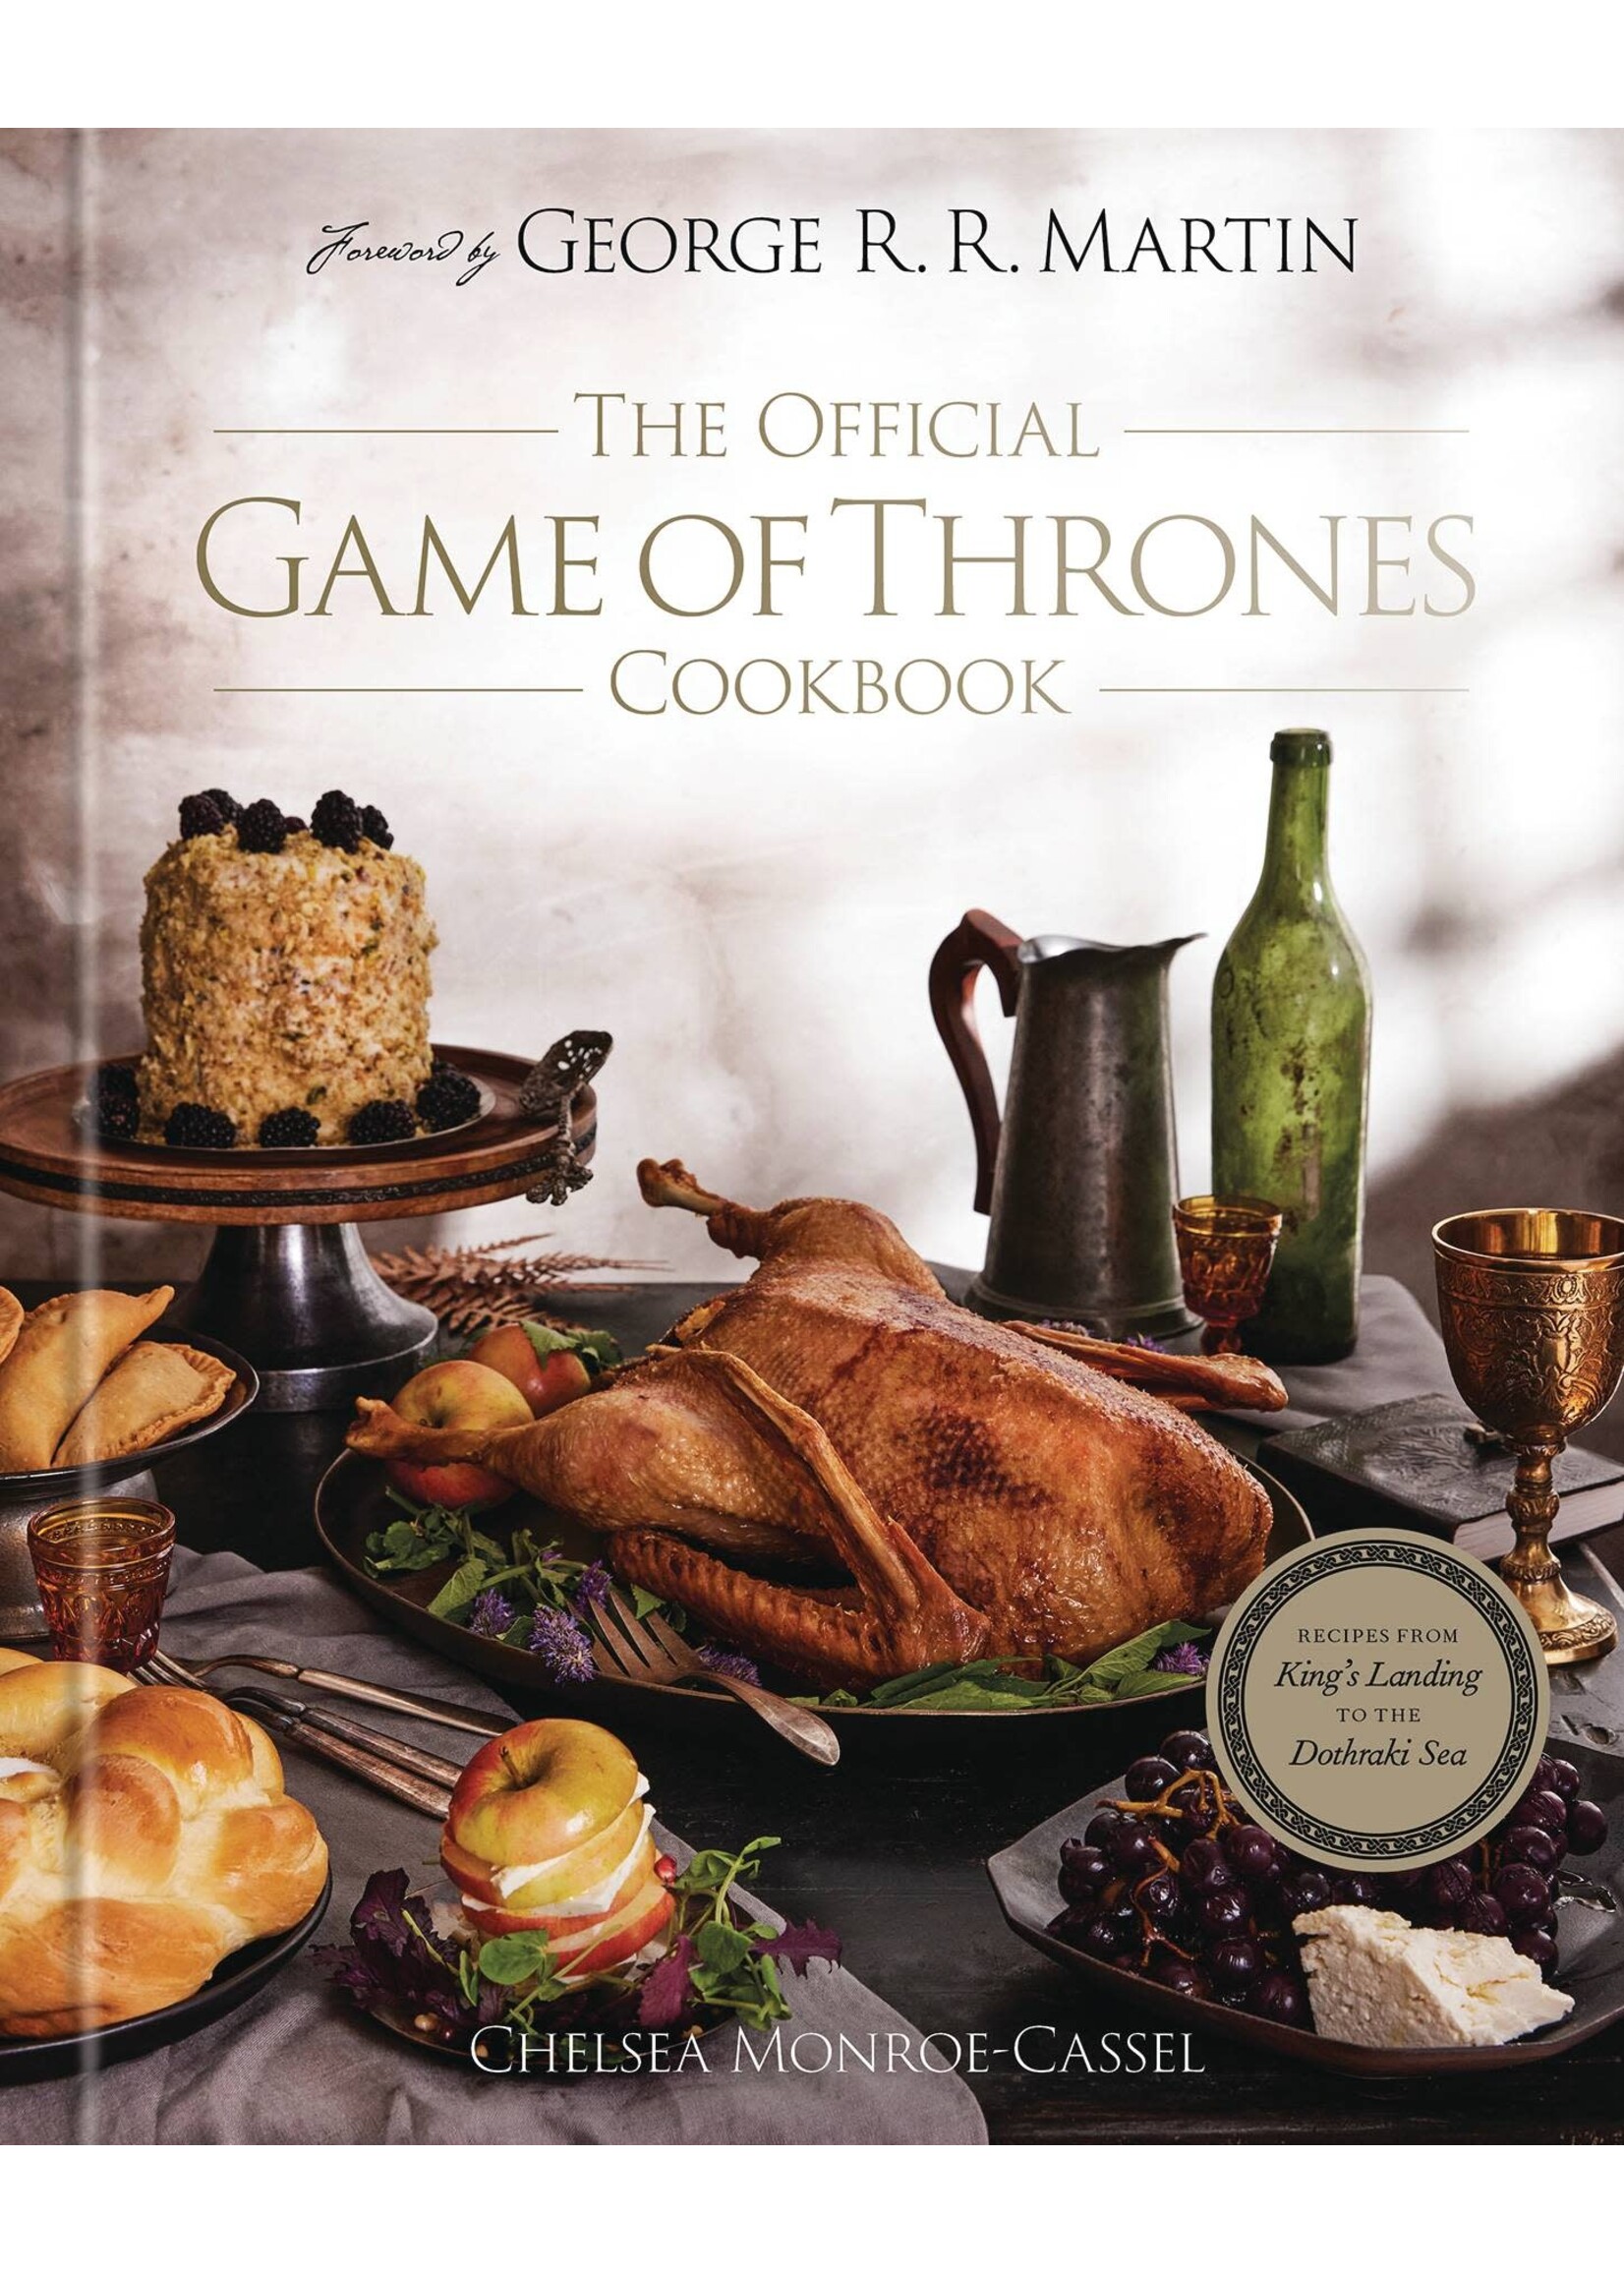 RANDOM HOUSE WORLDS OFFICIAL GAME OF THRONES COOKBOOK HC